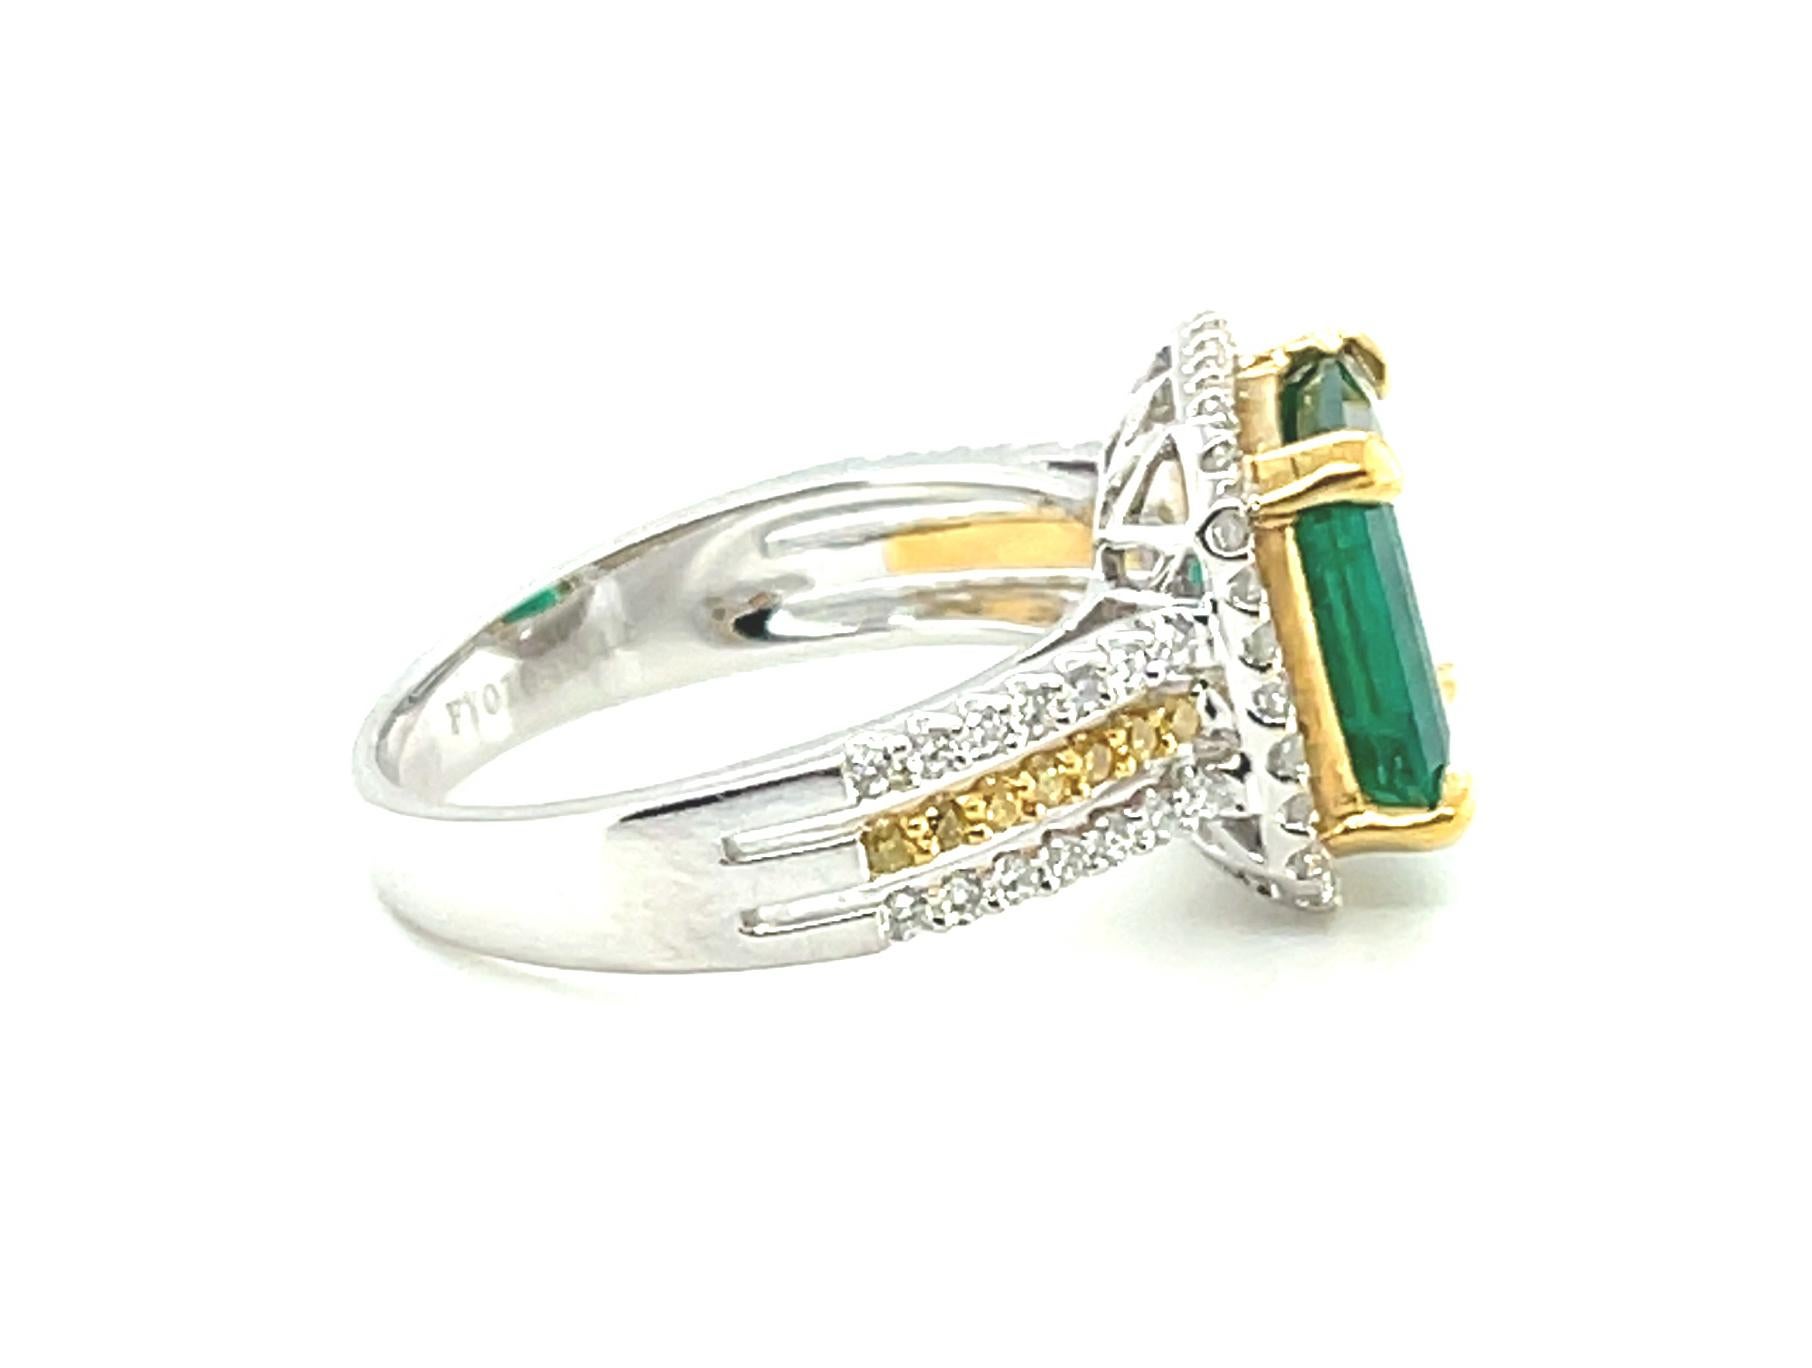 2.85 Carat Emerald Cocktail Ring with Canary and White Diamonds in 18k Gold For Sale 2